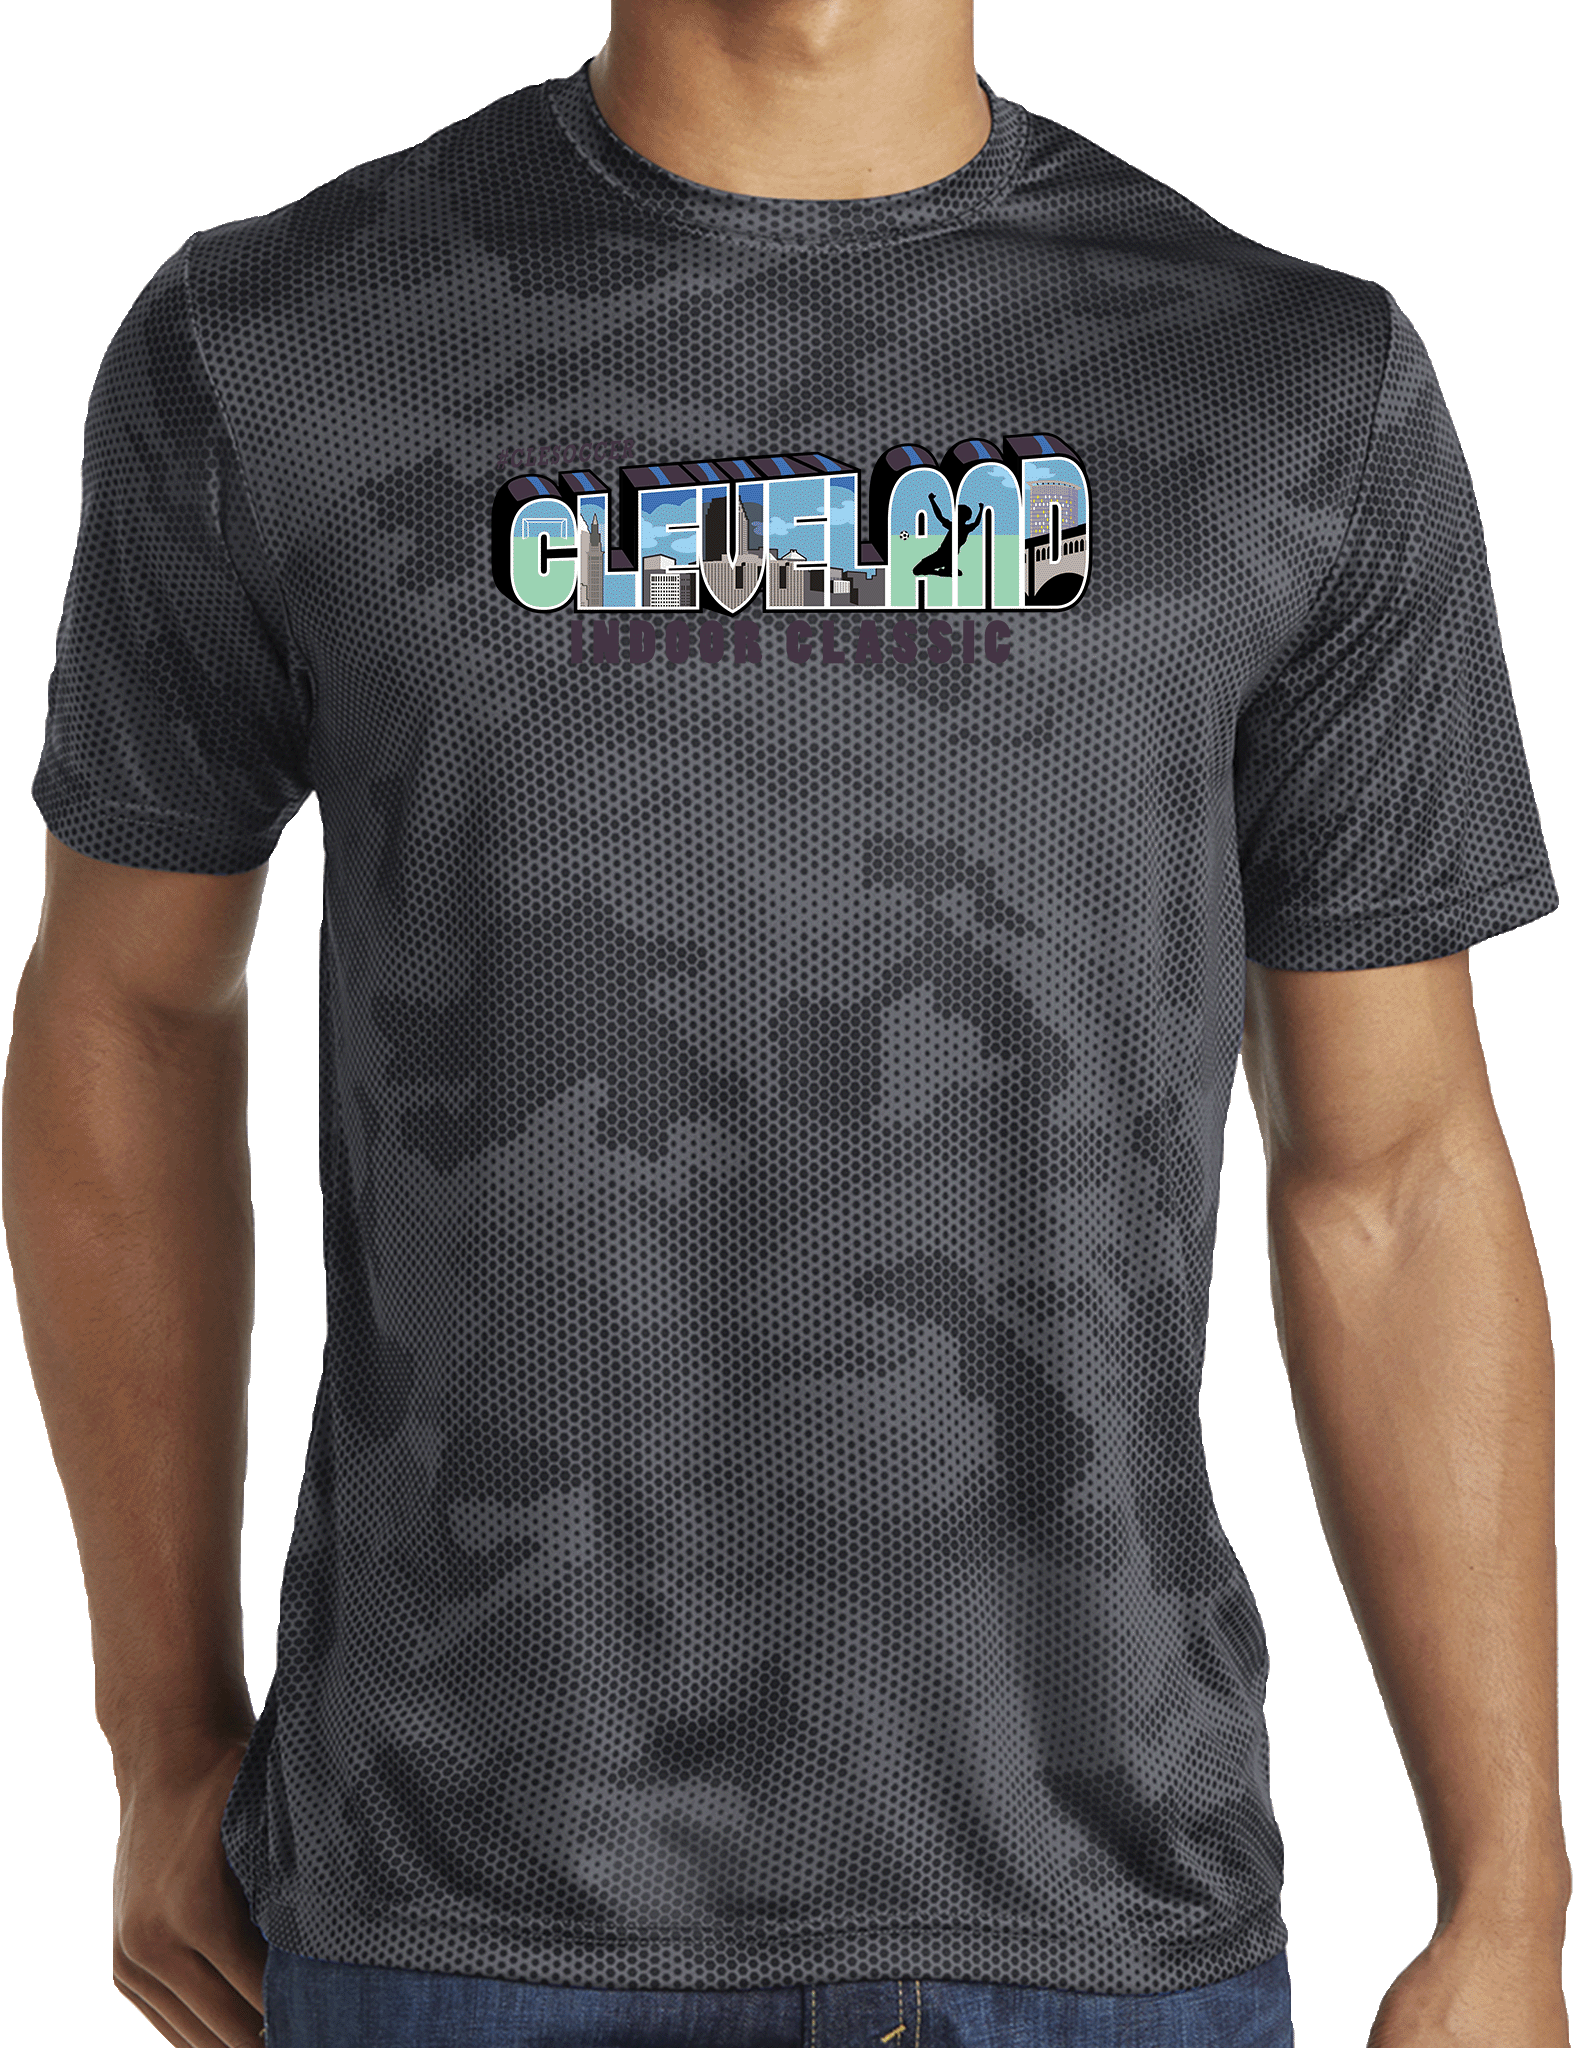 Performance Shirts - 2024 Cleveland Indoor Classic